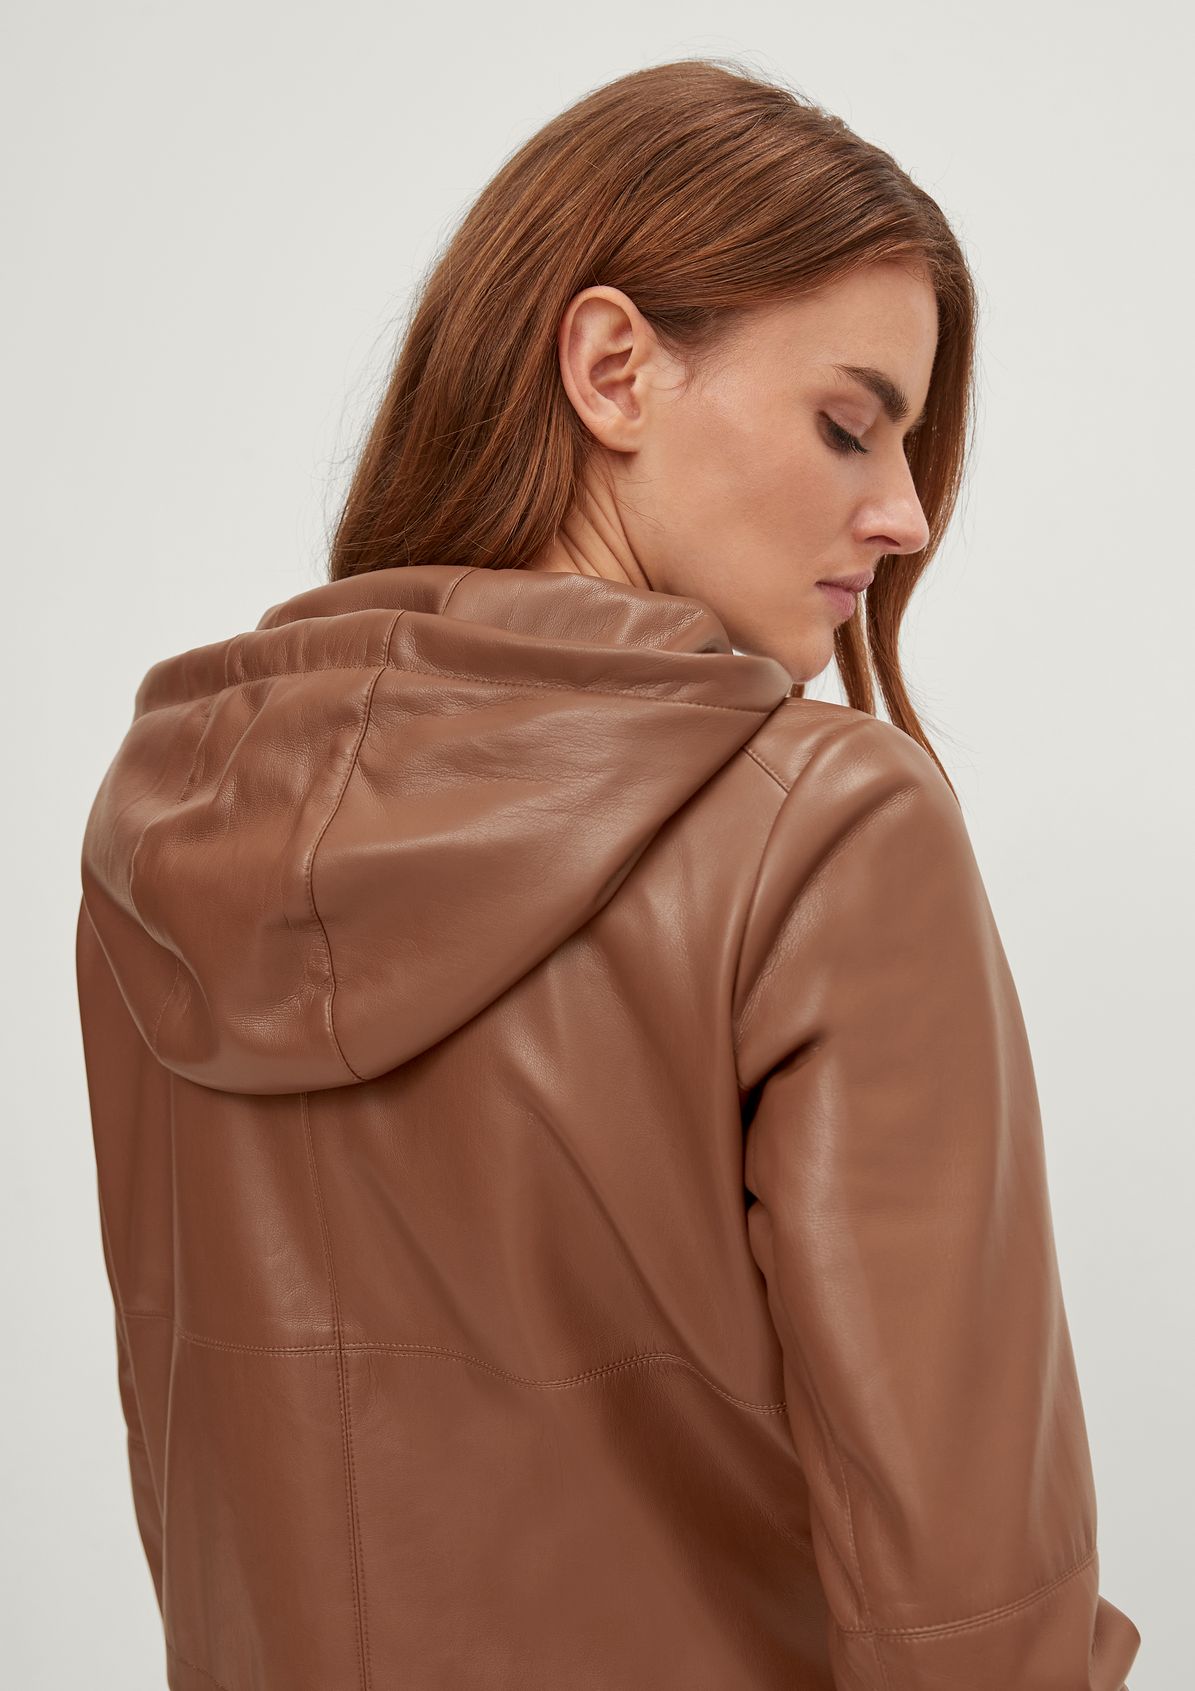 Faux leather jacket from comma